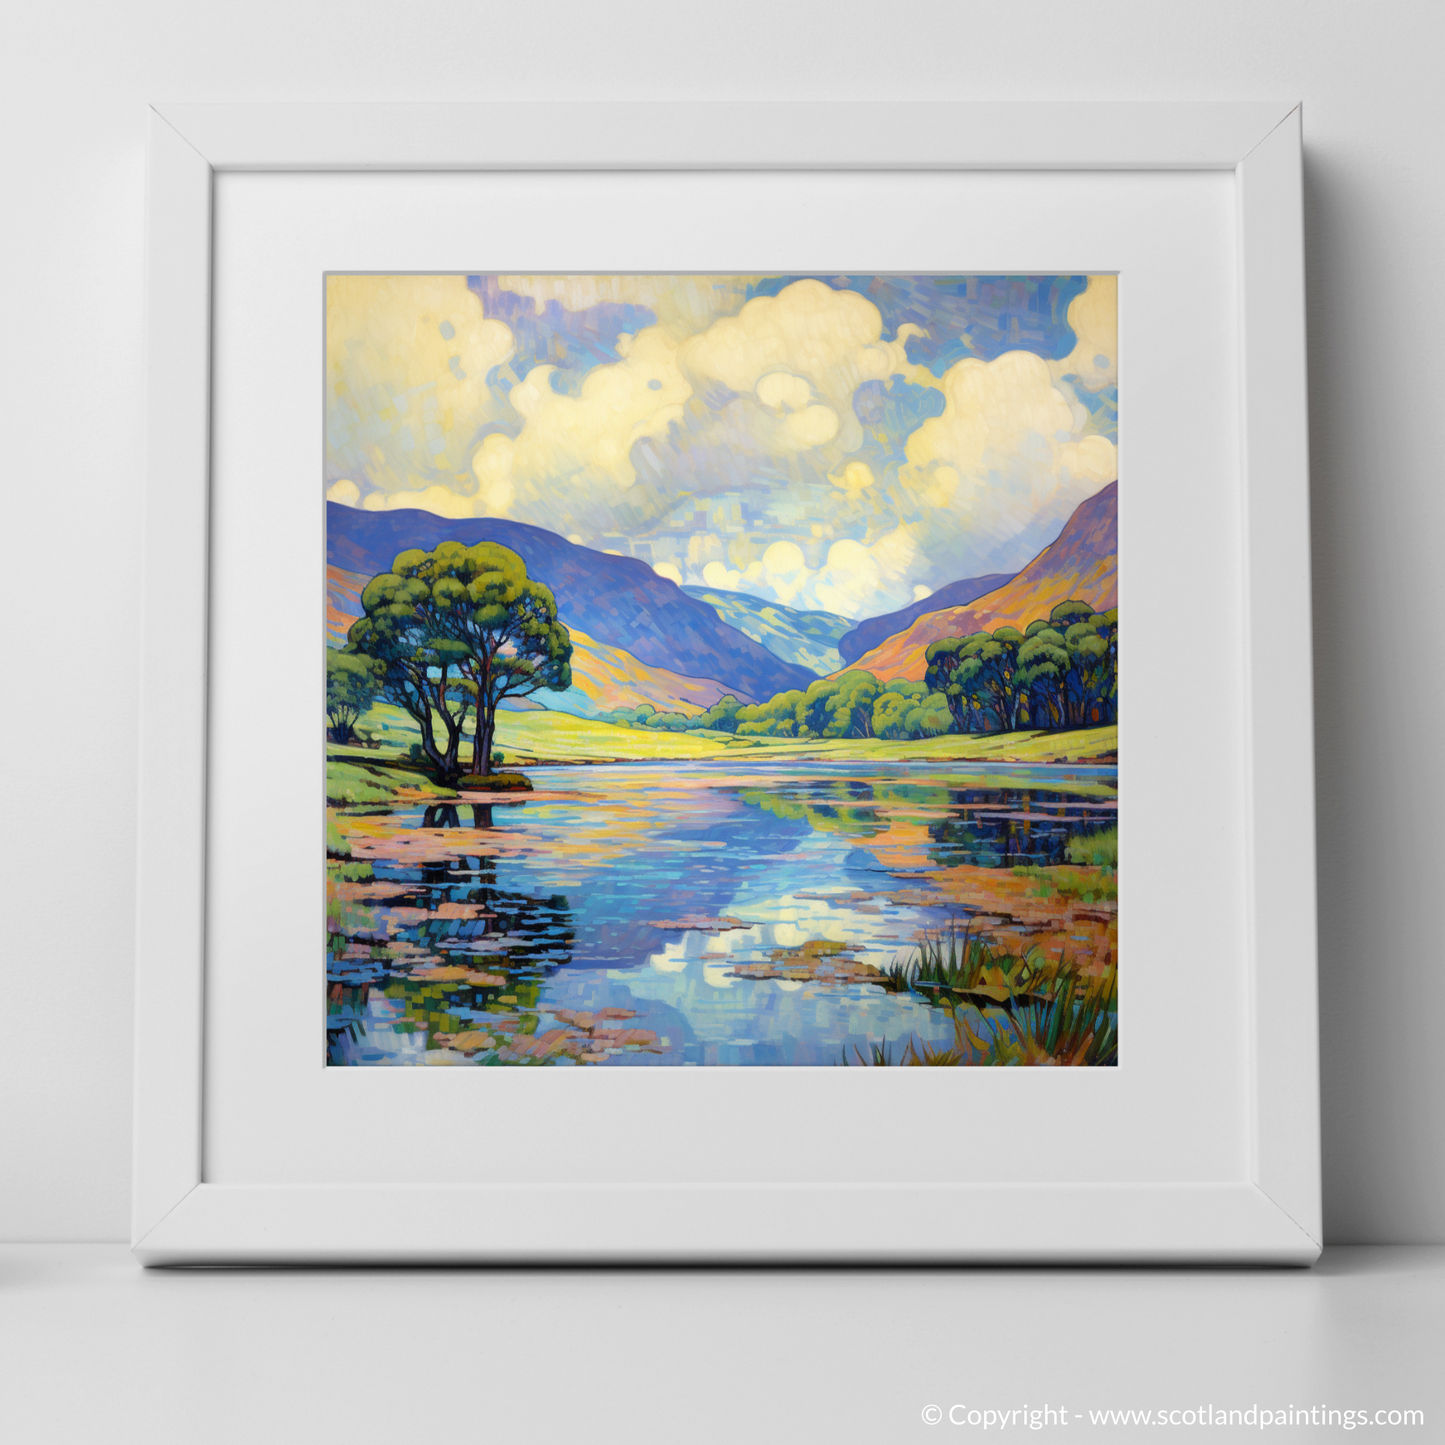 Art Print of Glen Lochay, Perthshire in summer with a white frame